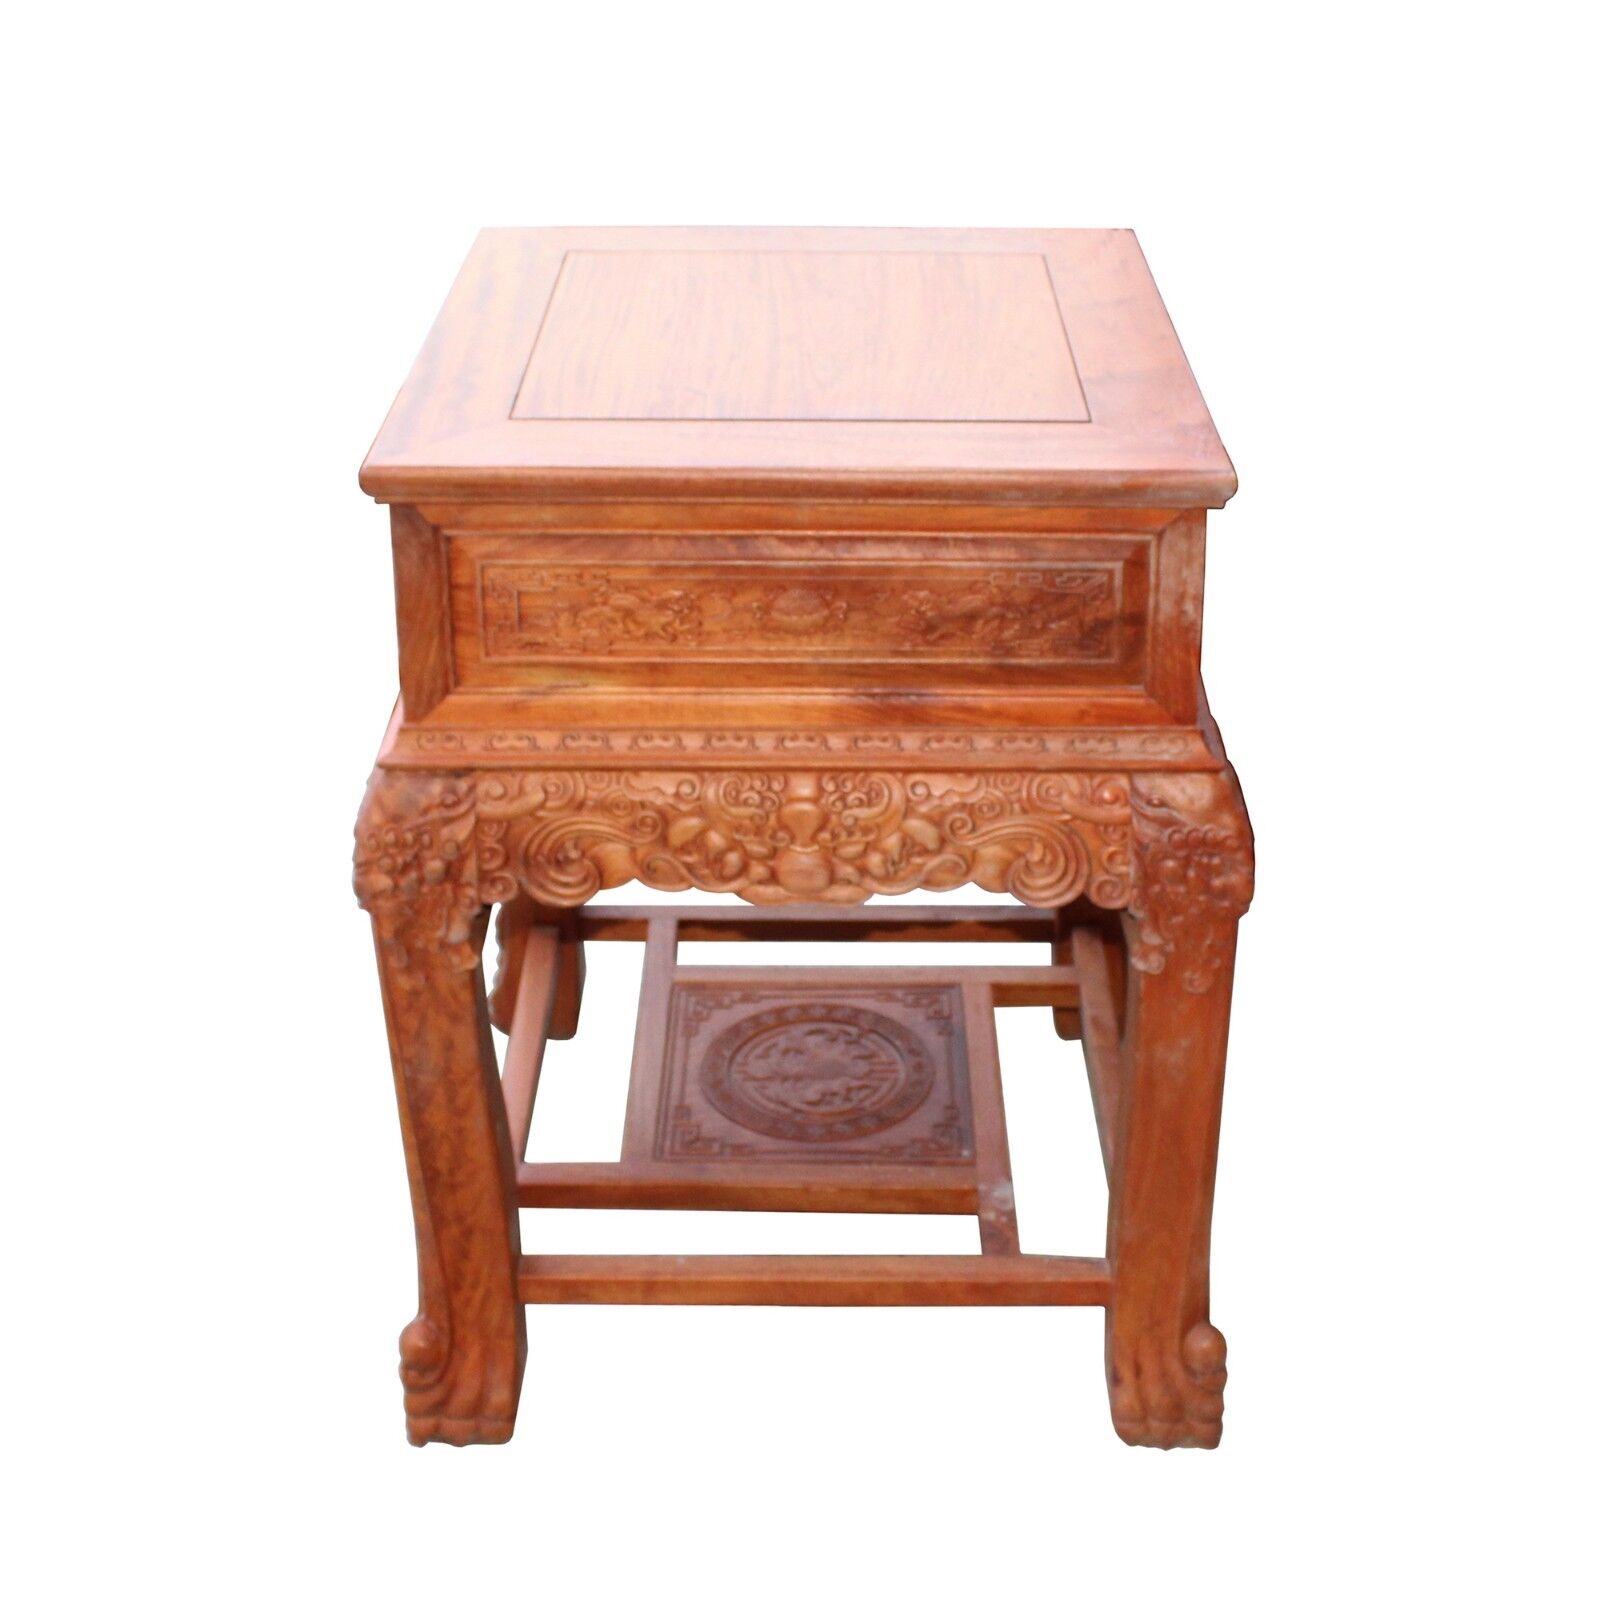 Chinese Oriental Huali Rosewood Foo Dogs Motif Tea Table Stand cs4529 Handmade Does Not Apply